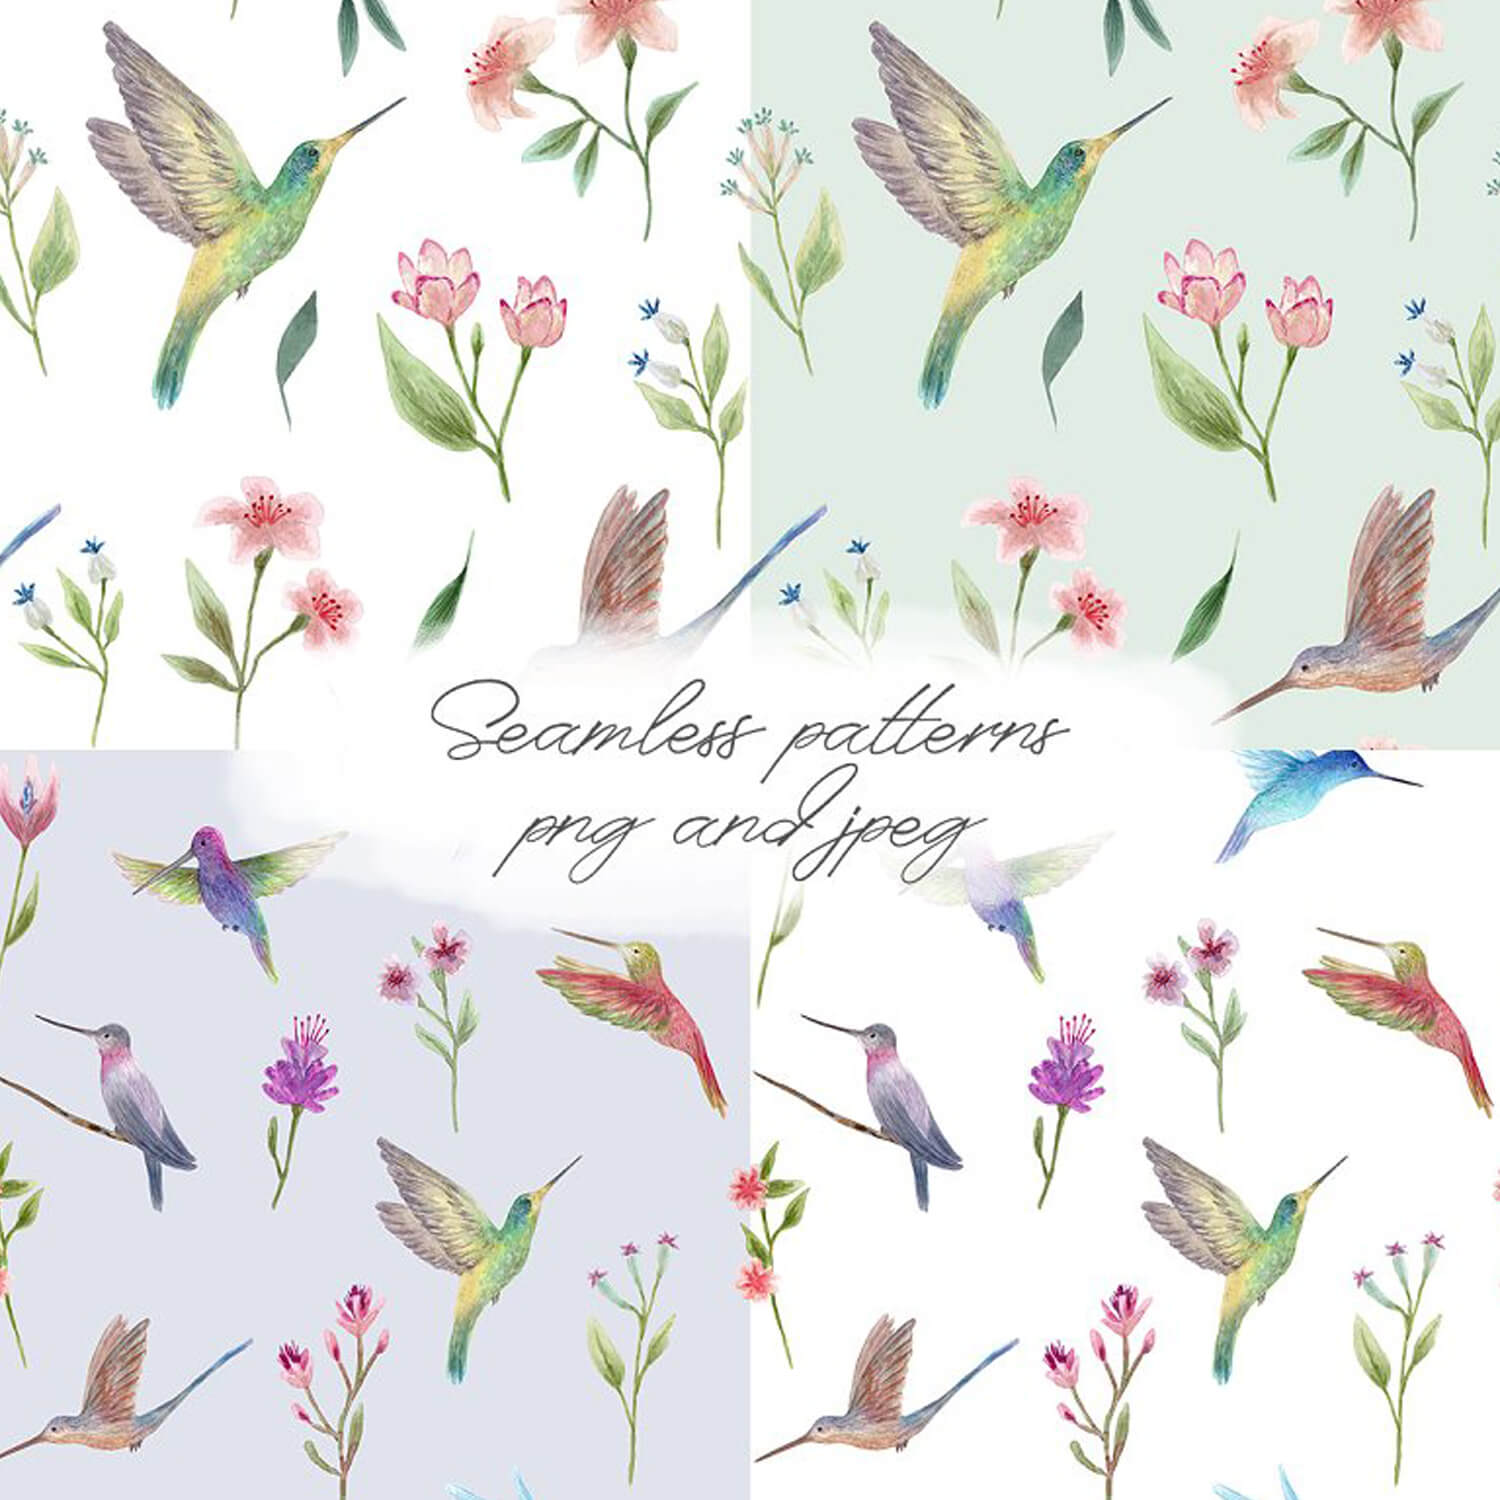 4 variants of painted hummingbirds: on different backgrounds, on white and blue, and in different sizes, large and small.